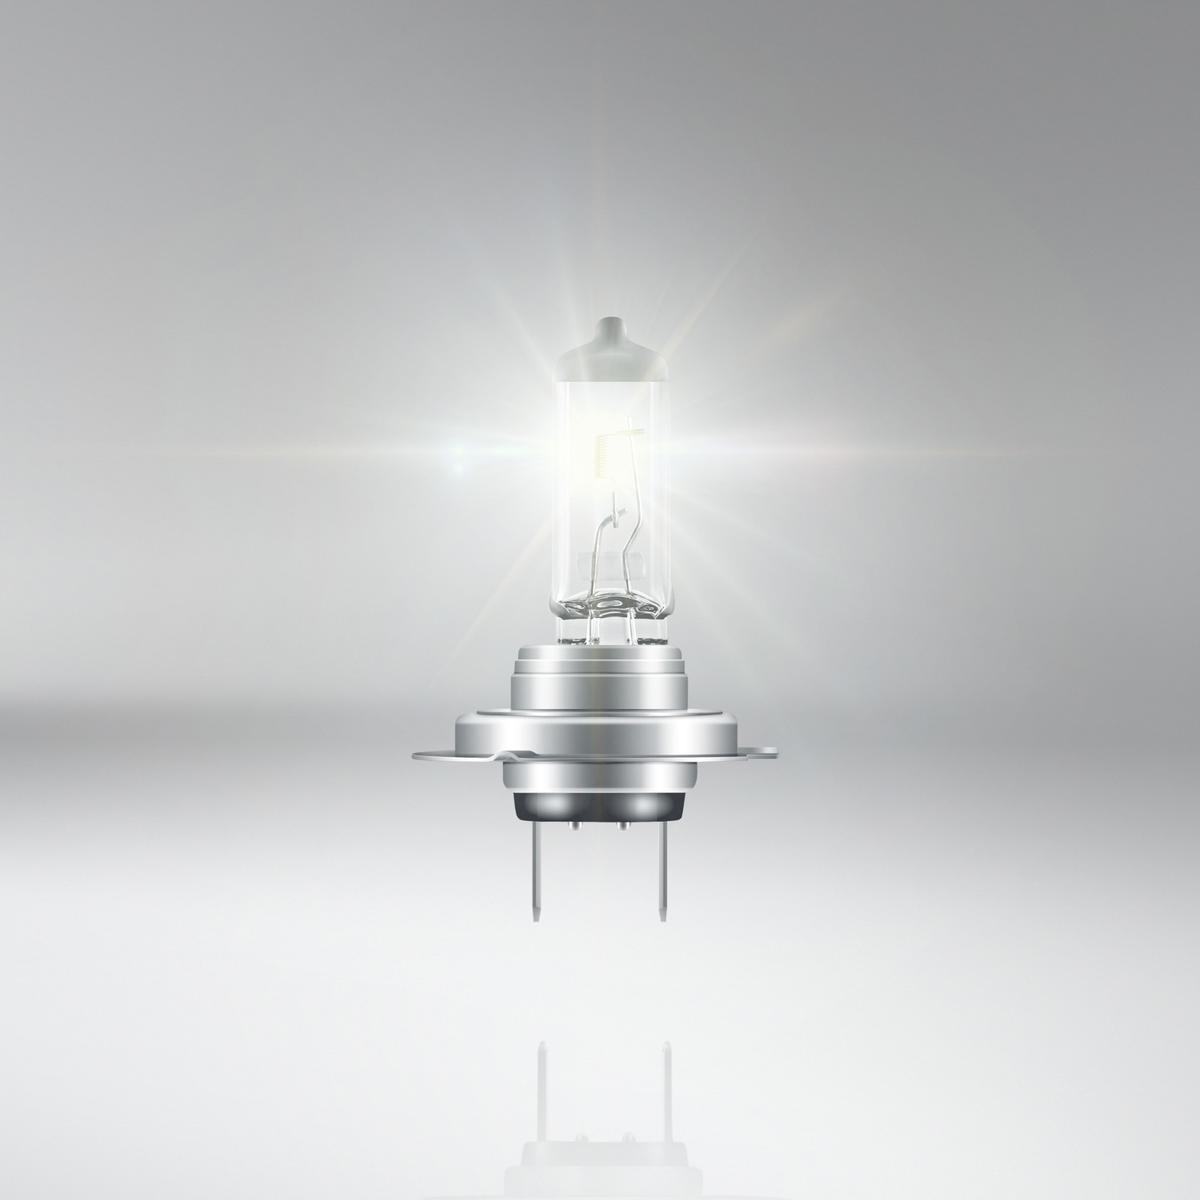 6421001B High beam bulb OSRAM 64210-01B review and test